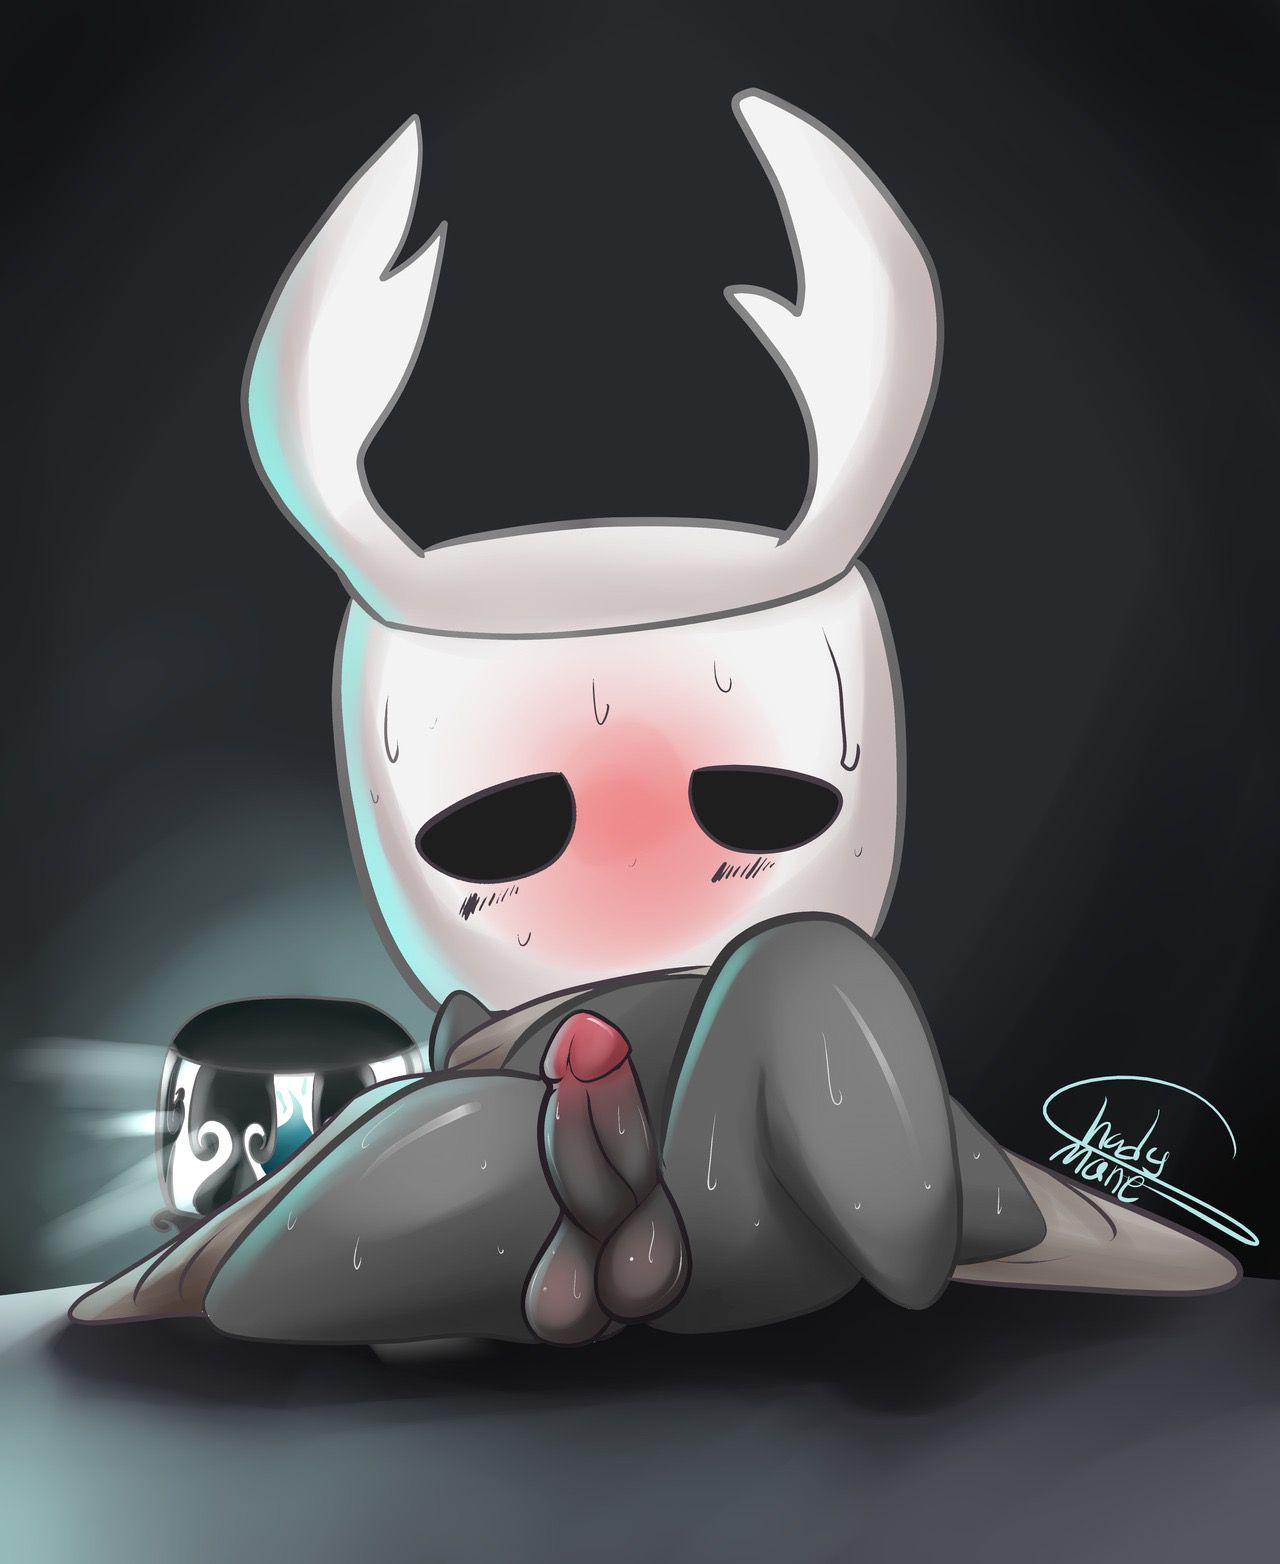 Hollow knight collection 65